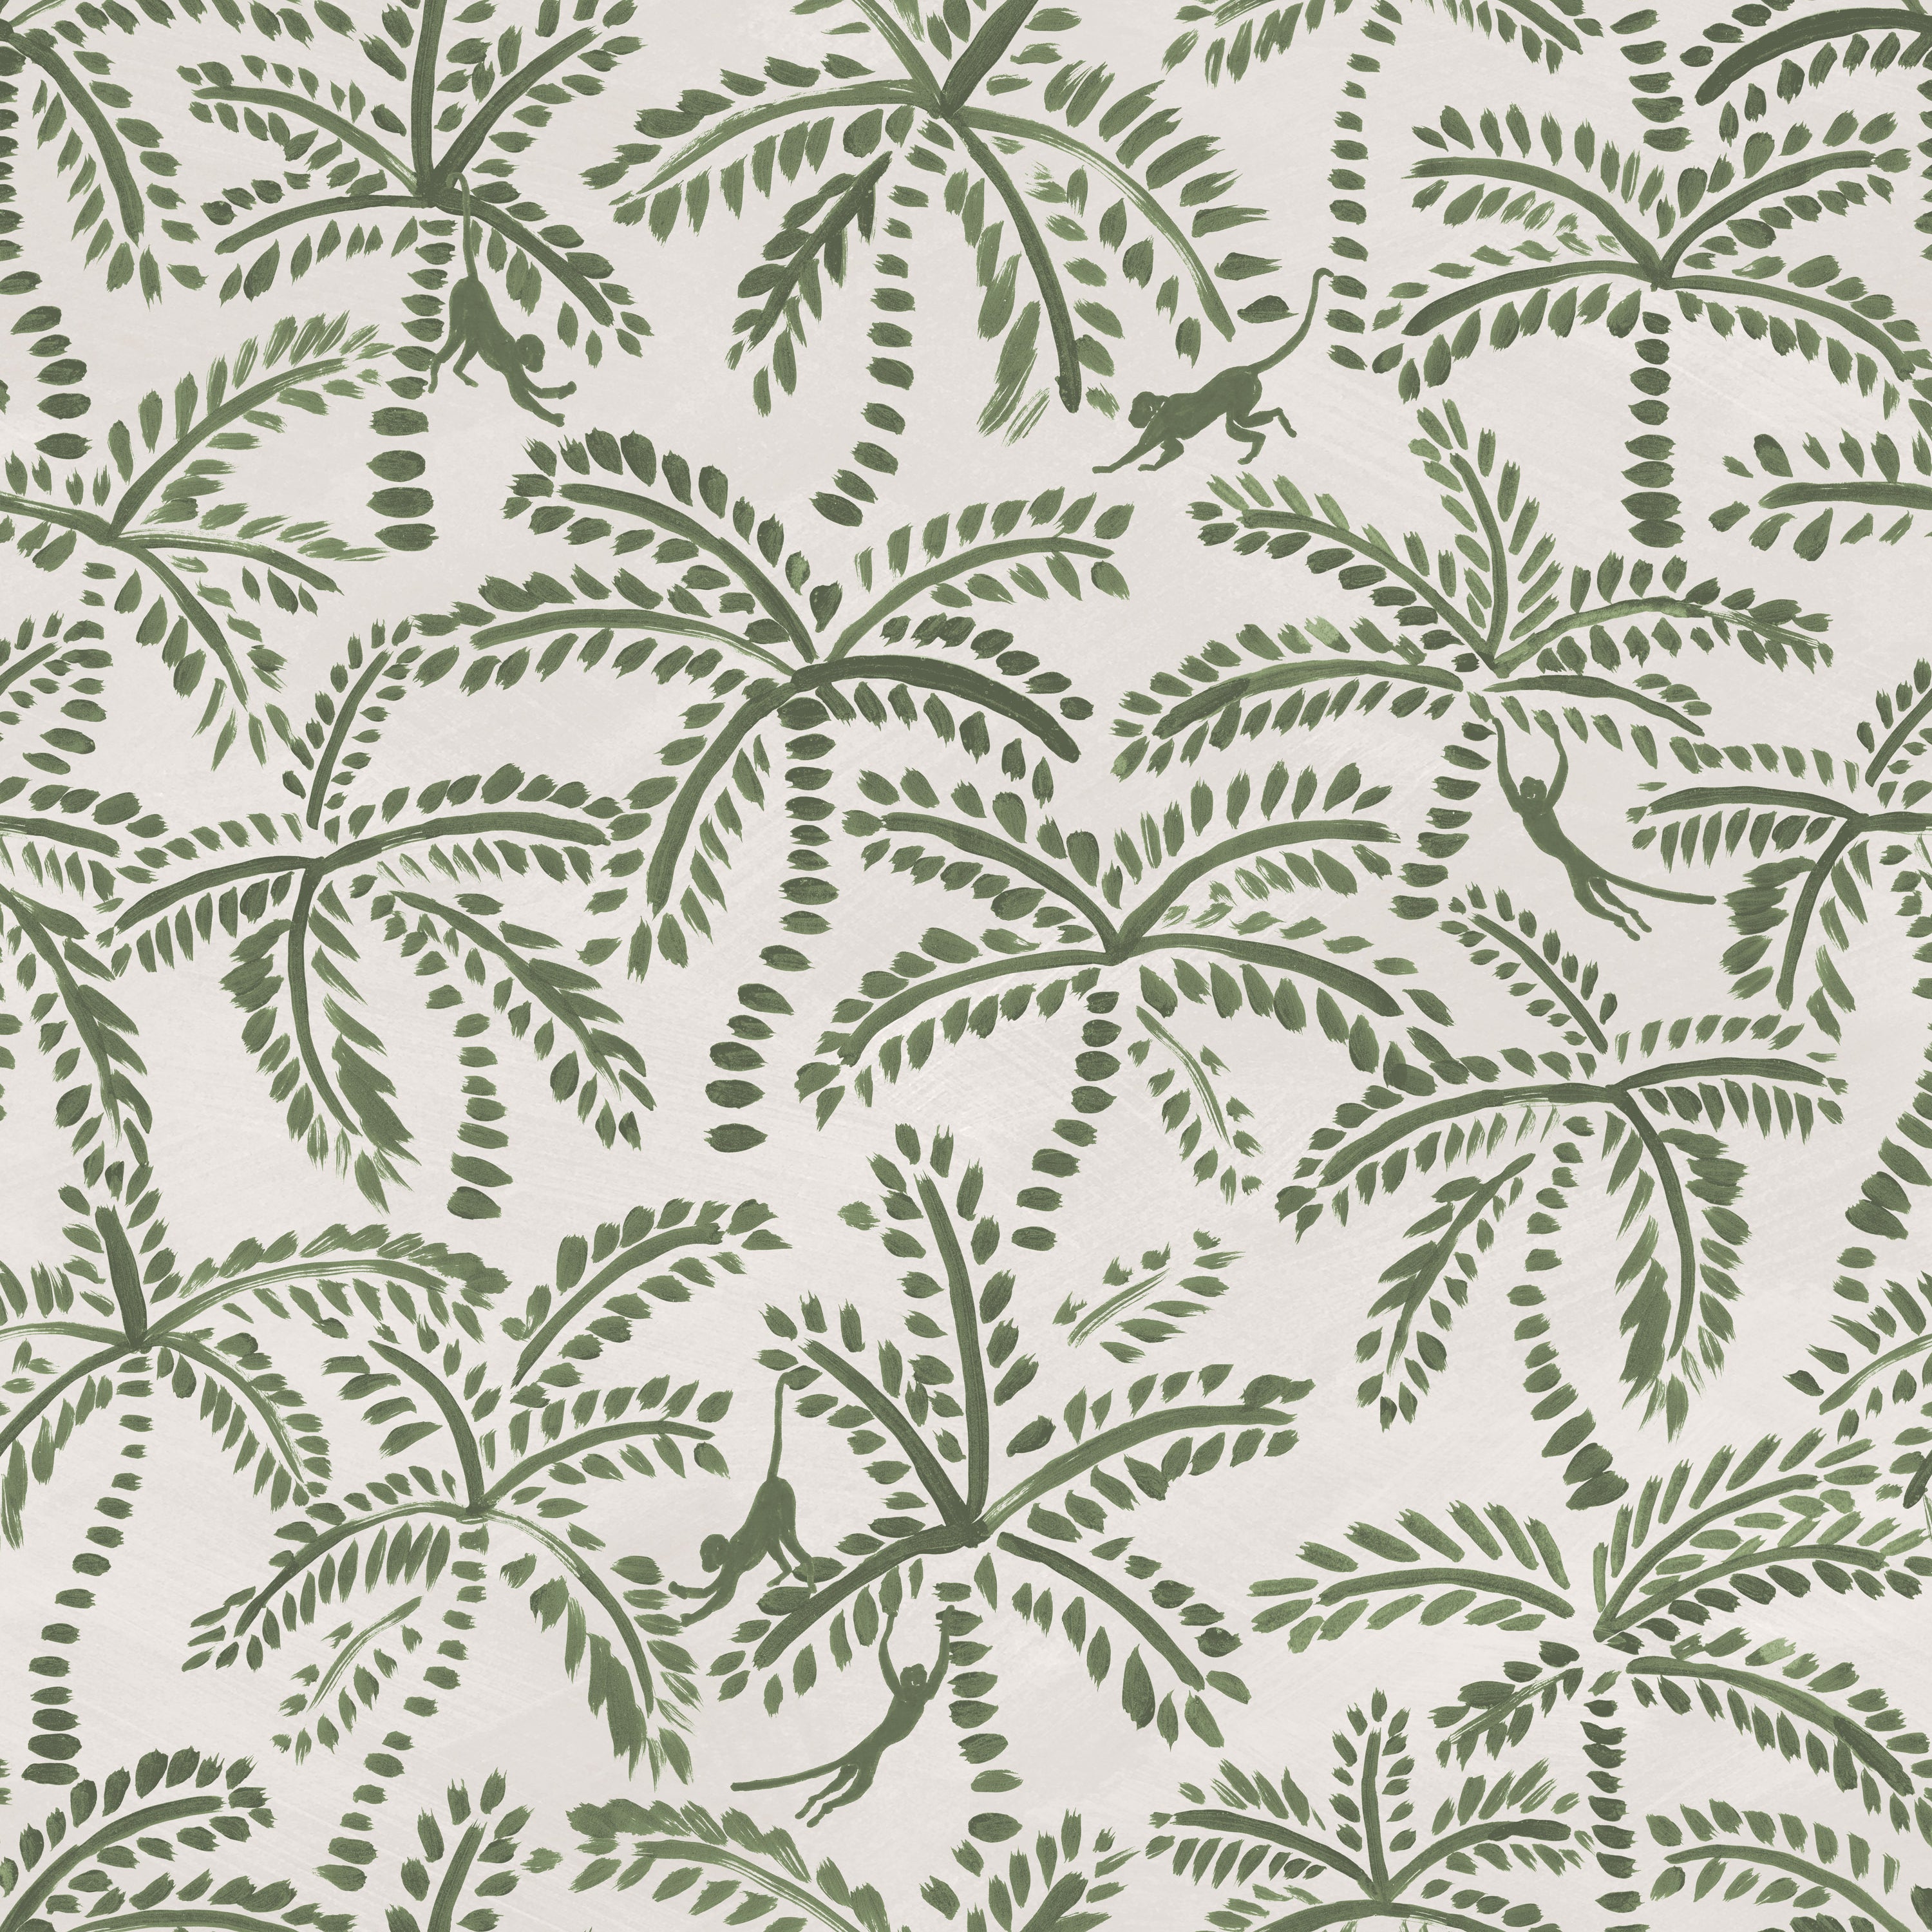 Detail of fabric in a playful palm tree and monkey print in green on a cream field.